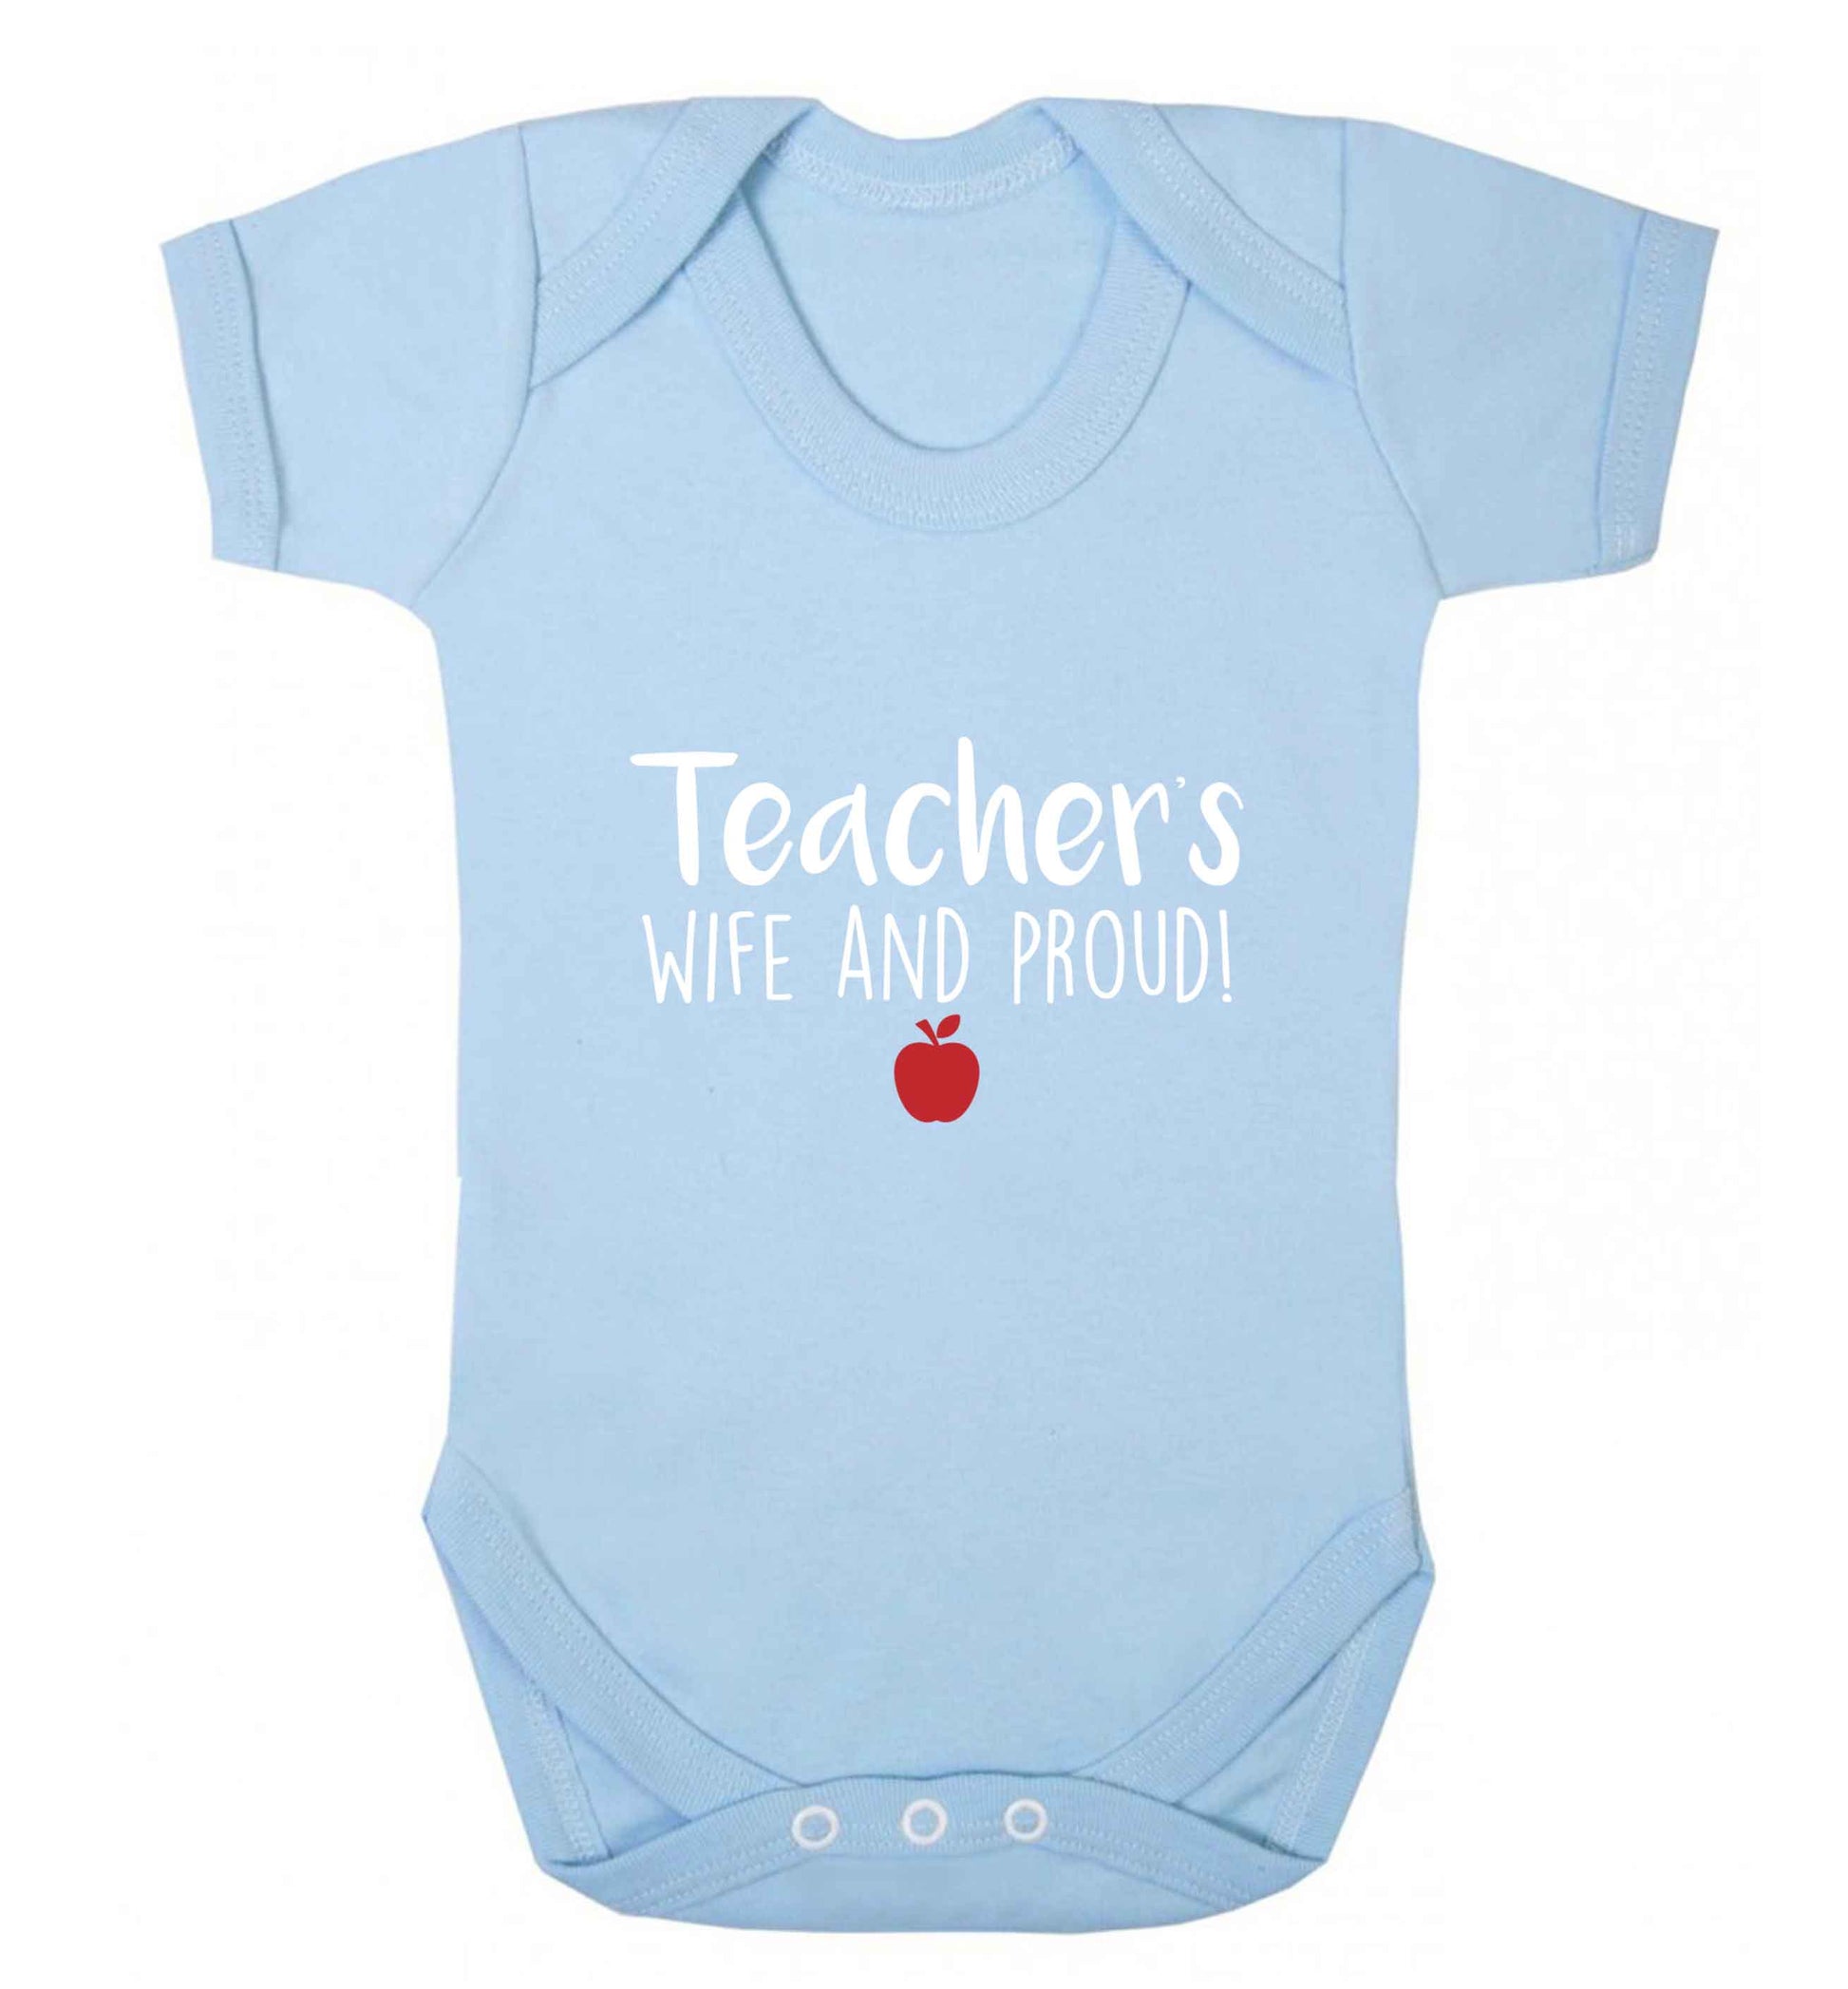 Teachers wife and proud baby vest pale blue 18-24 months